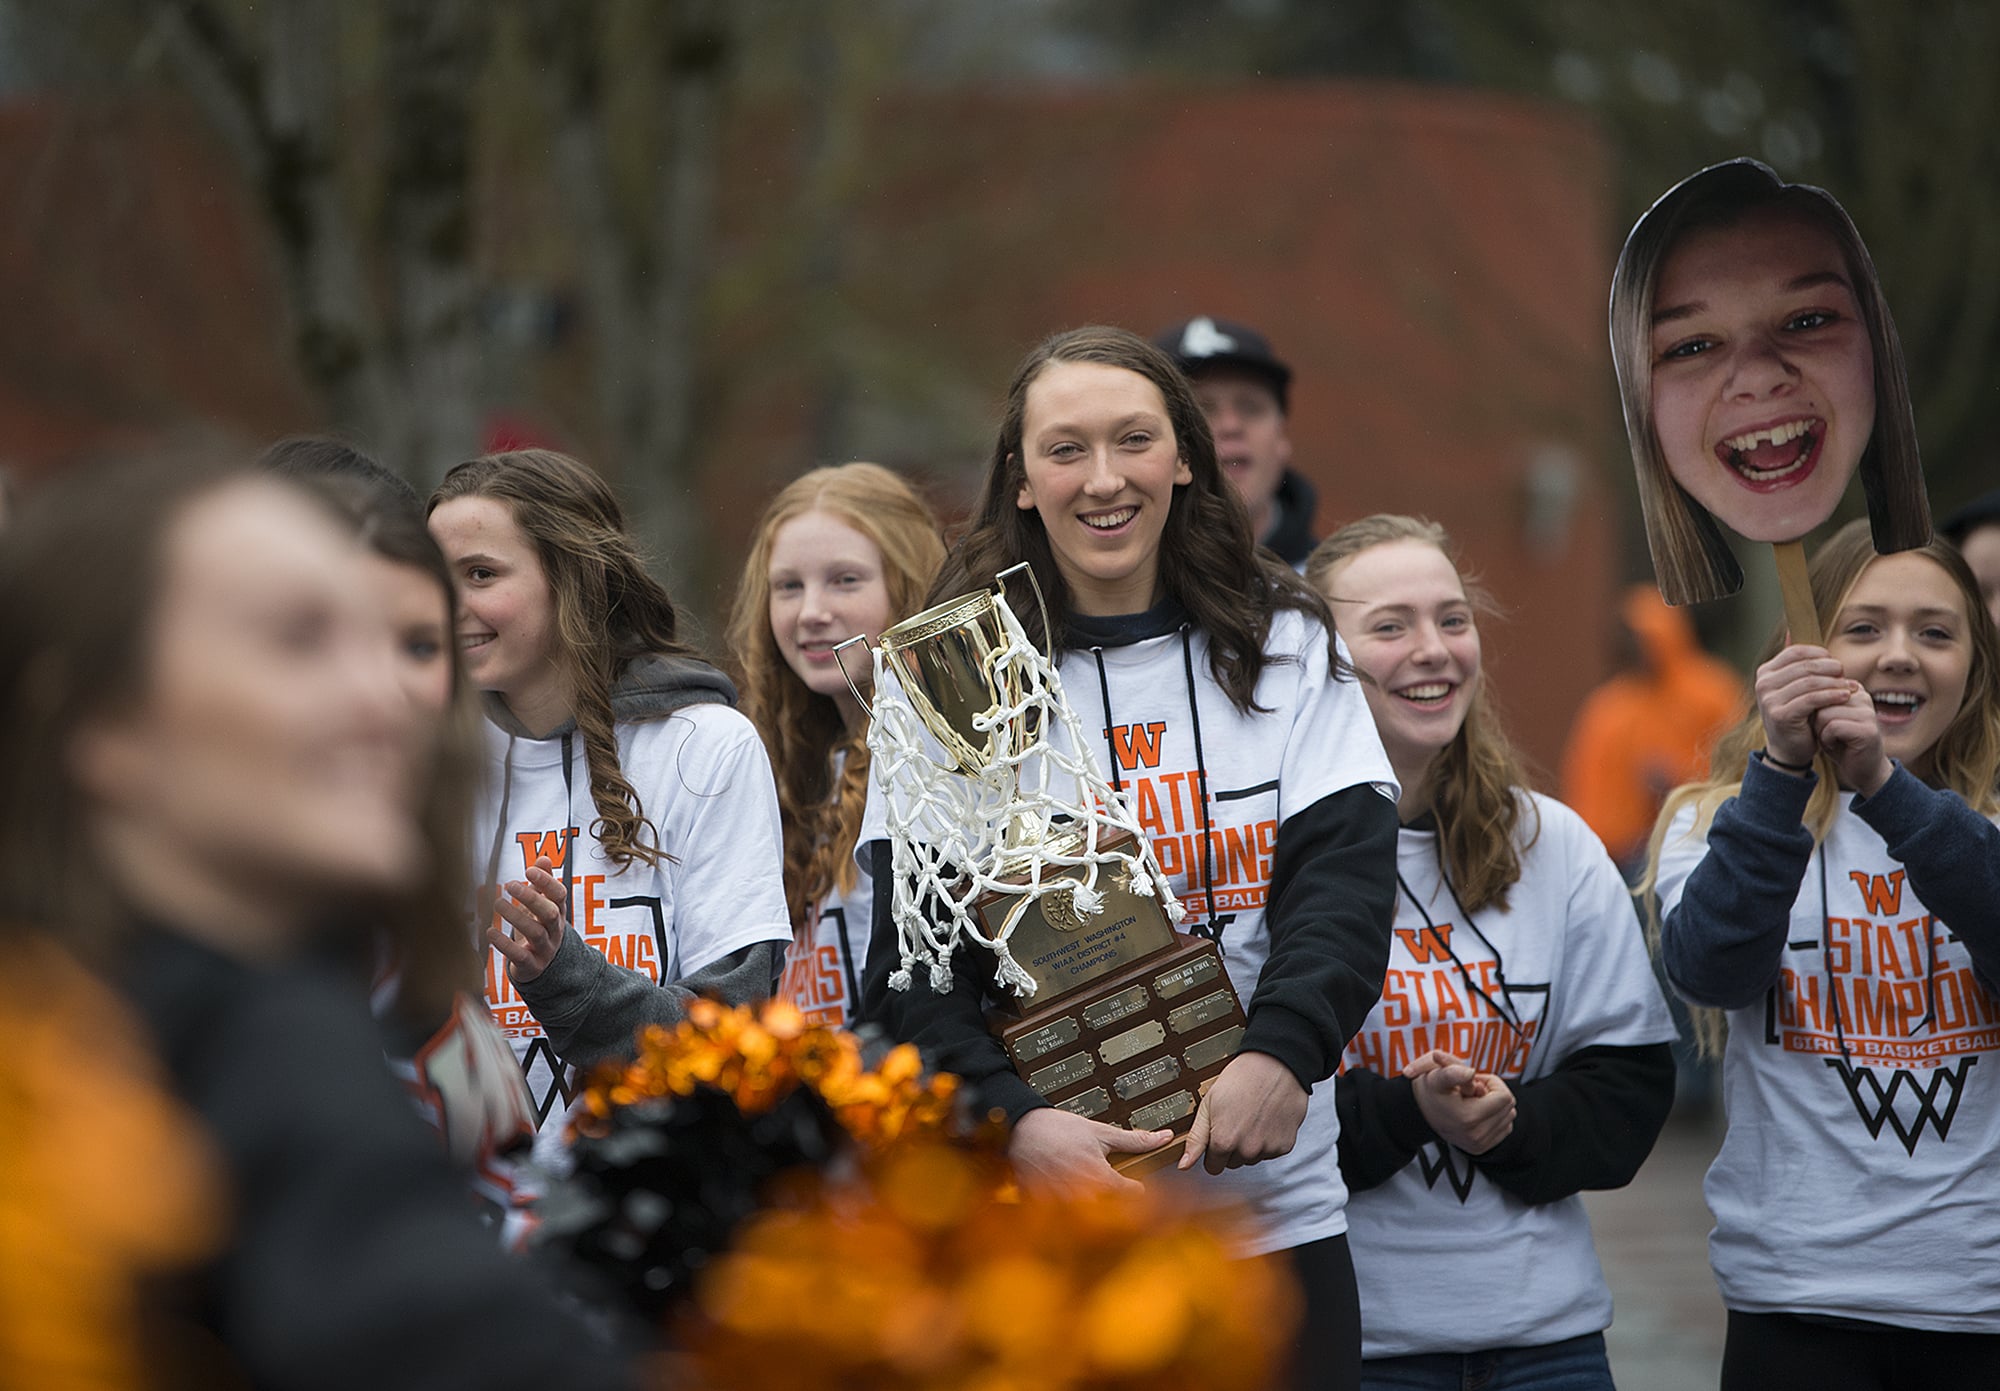 Washougal's Beyonce Bea, center, joins her teammates in celebrating the team's girls state basketball championship at Reflection Plaza in Washougal on Friday morning, March 8, 2019.